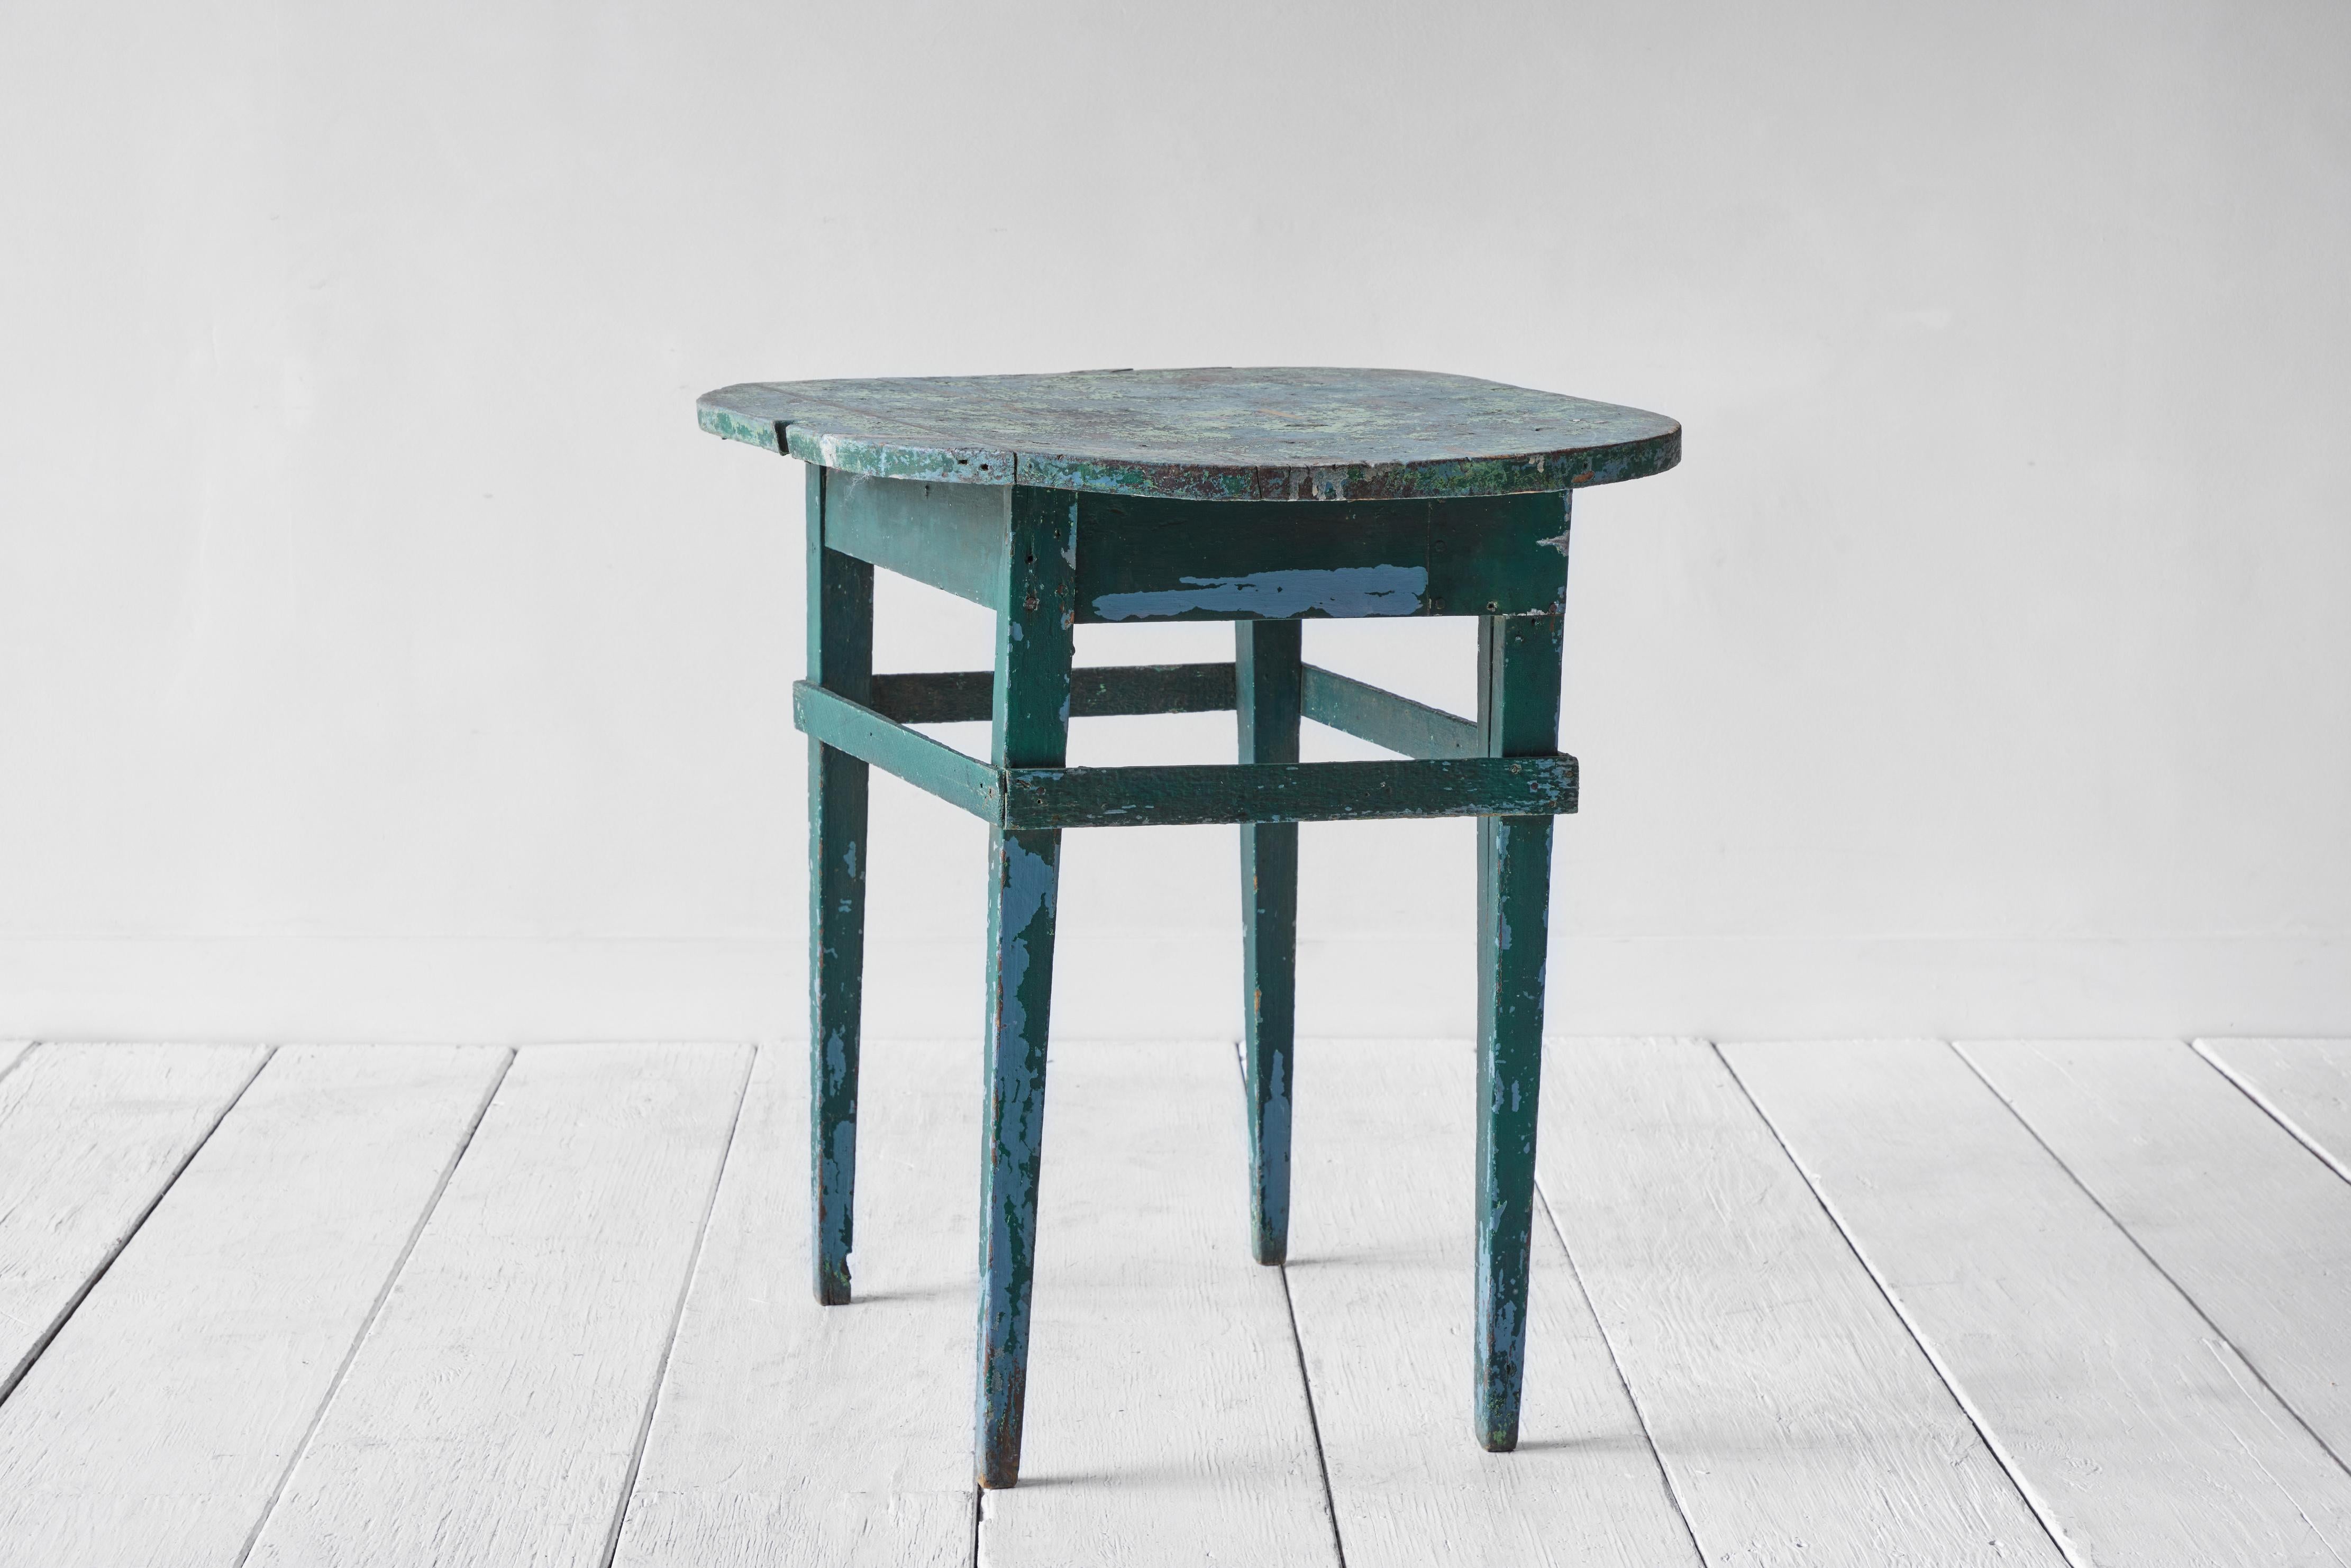 Rustic early American painted green wood side table.